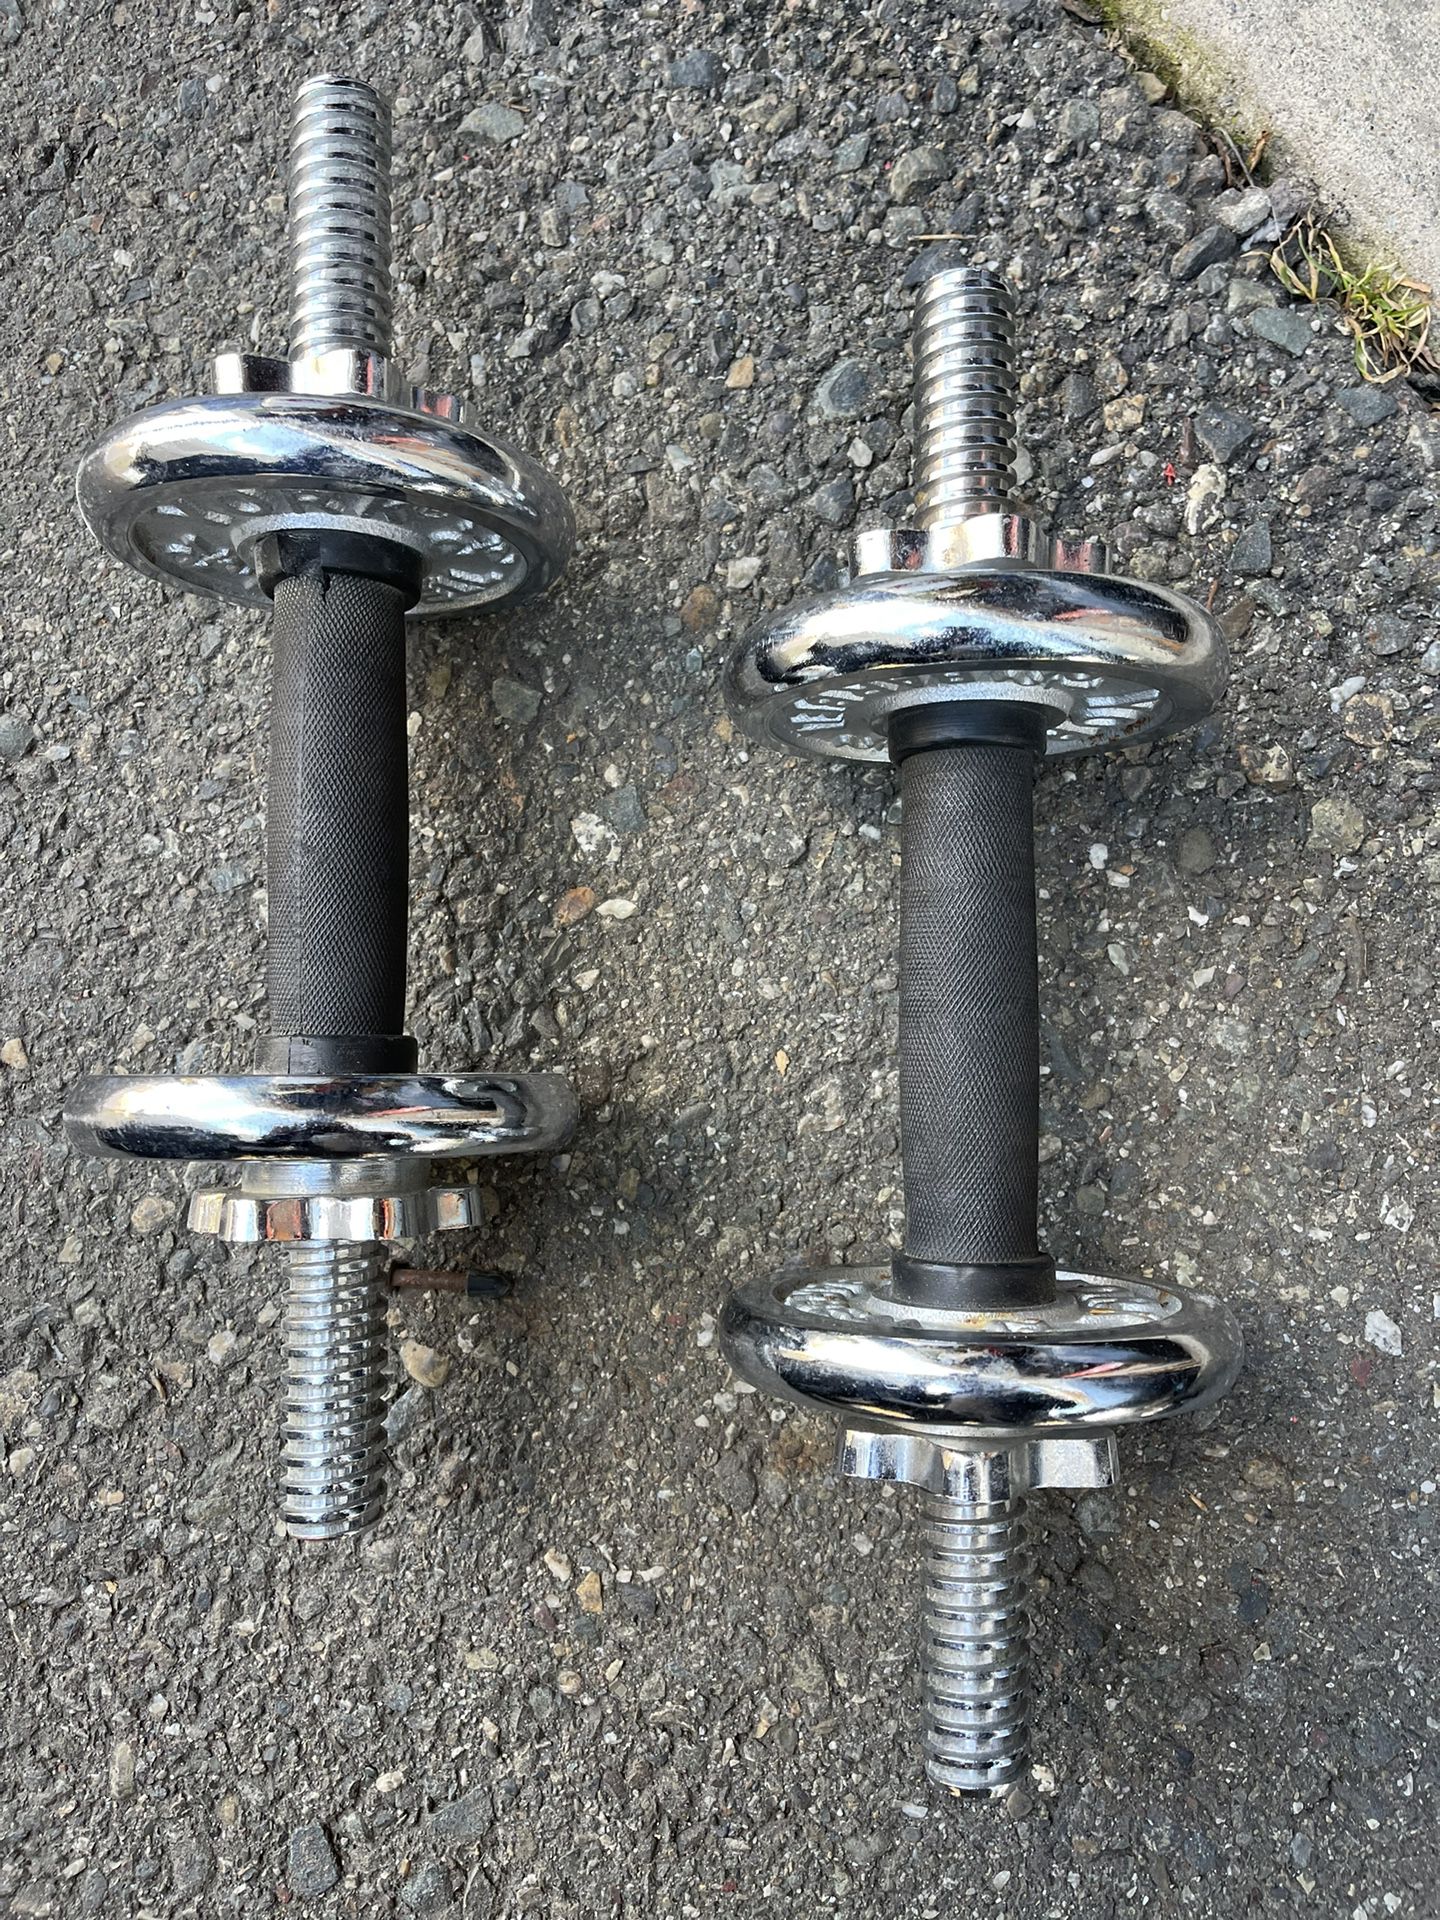 Pairs Of 5 And 15 Pound Dumbbells For Workouts 